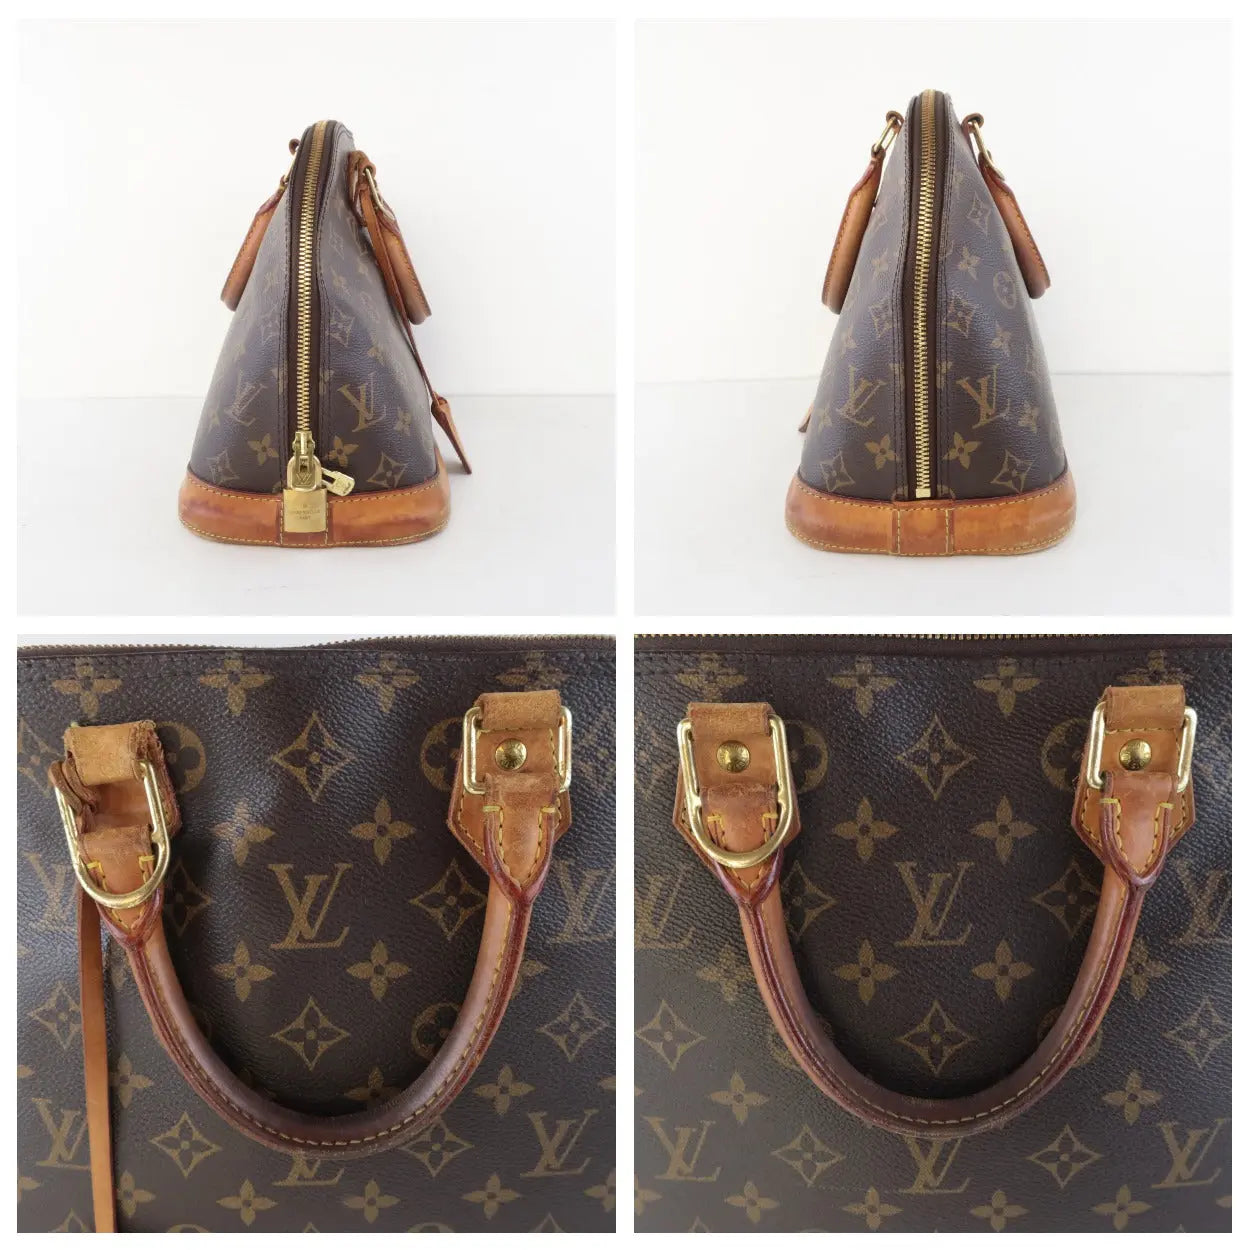 Louis Vuitton Alma PM in Monogram Canvas Review: Unboxing, Details, What  Fits & History of the Bag 